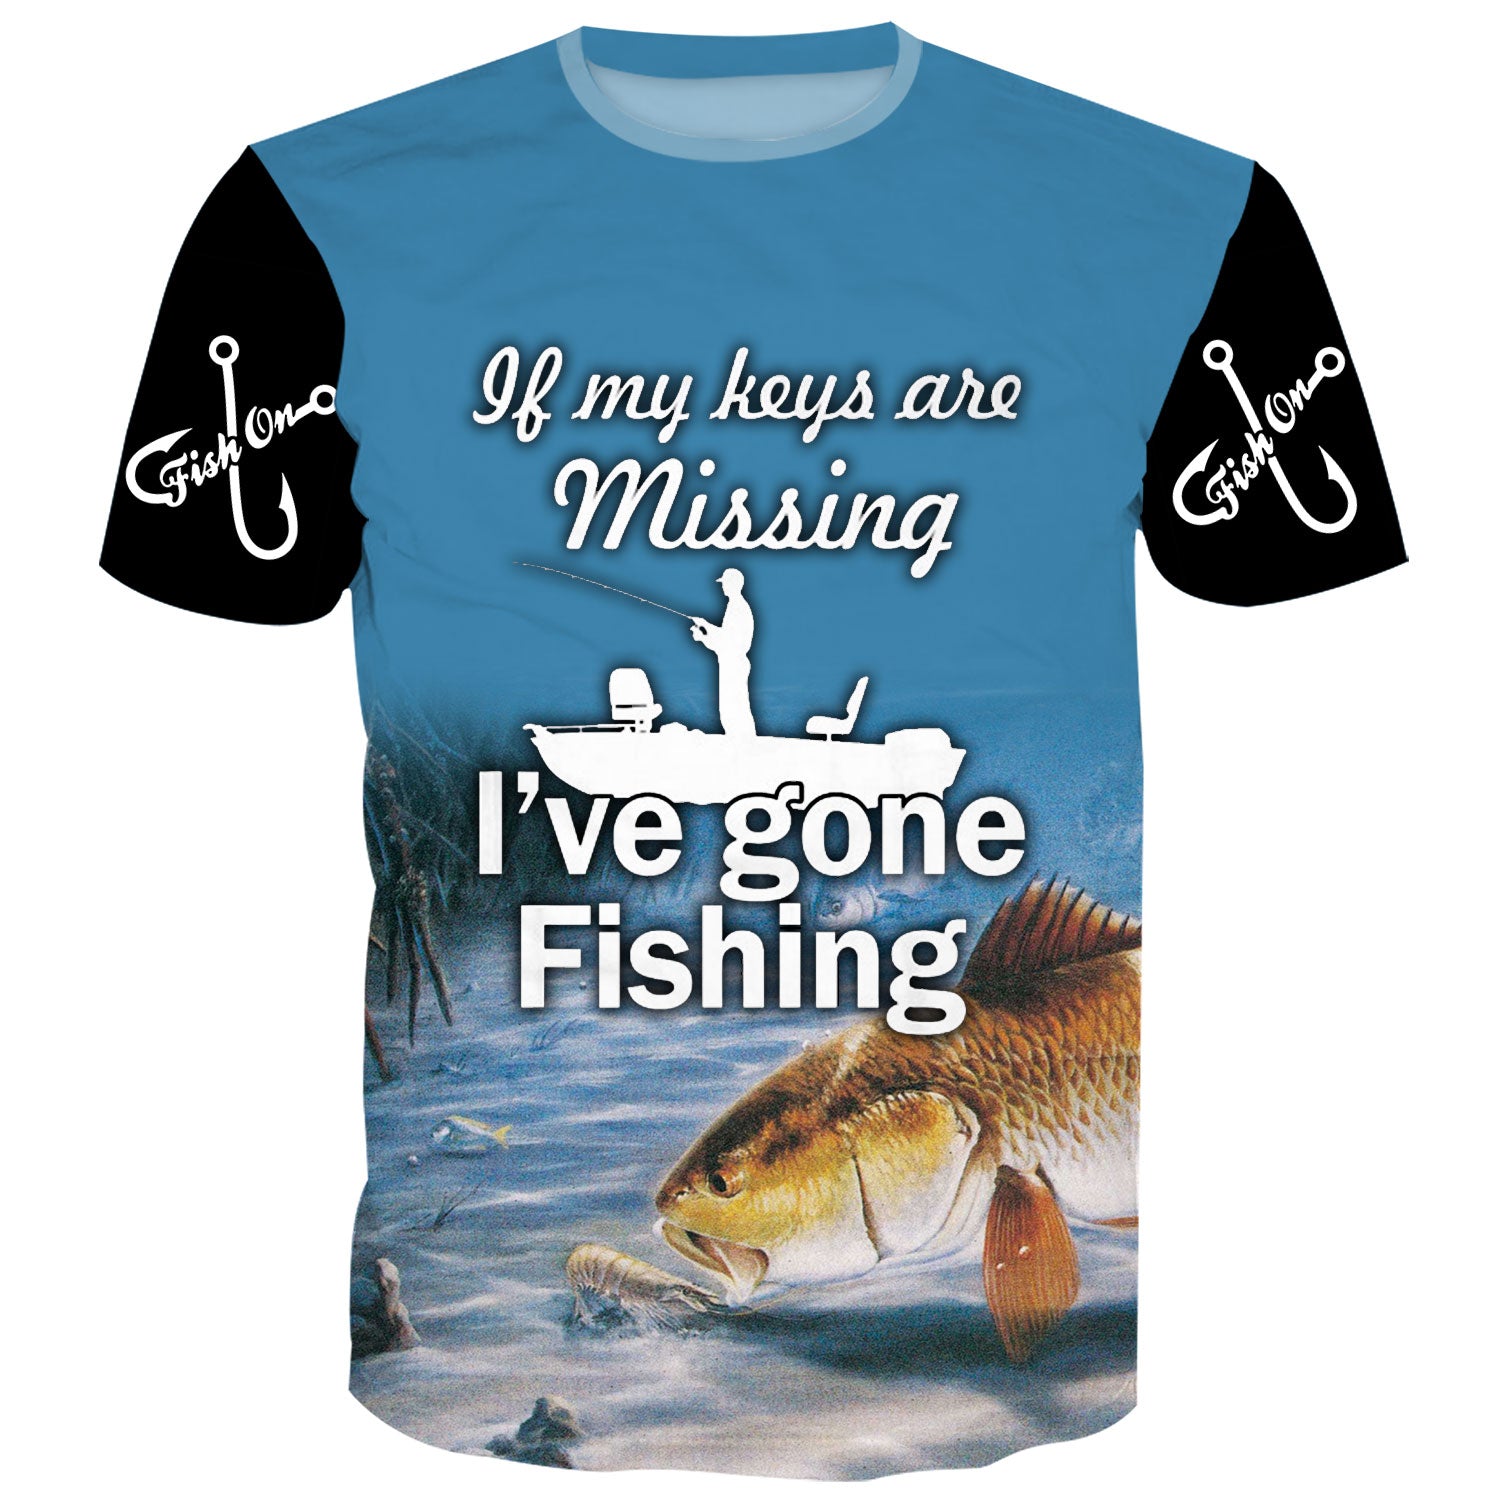 If my keys are missing, I have gone Fishing